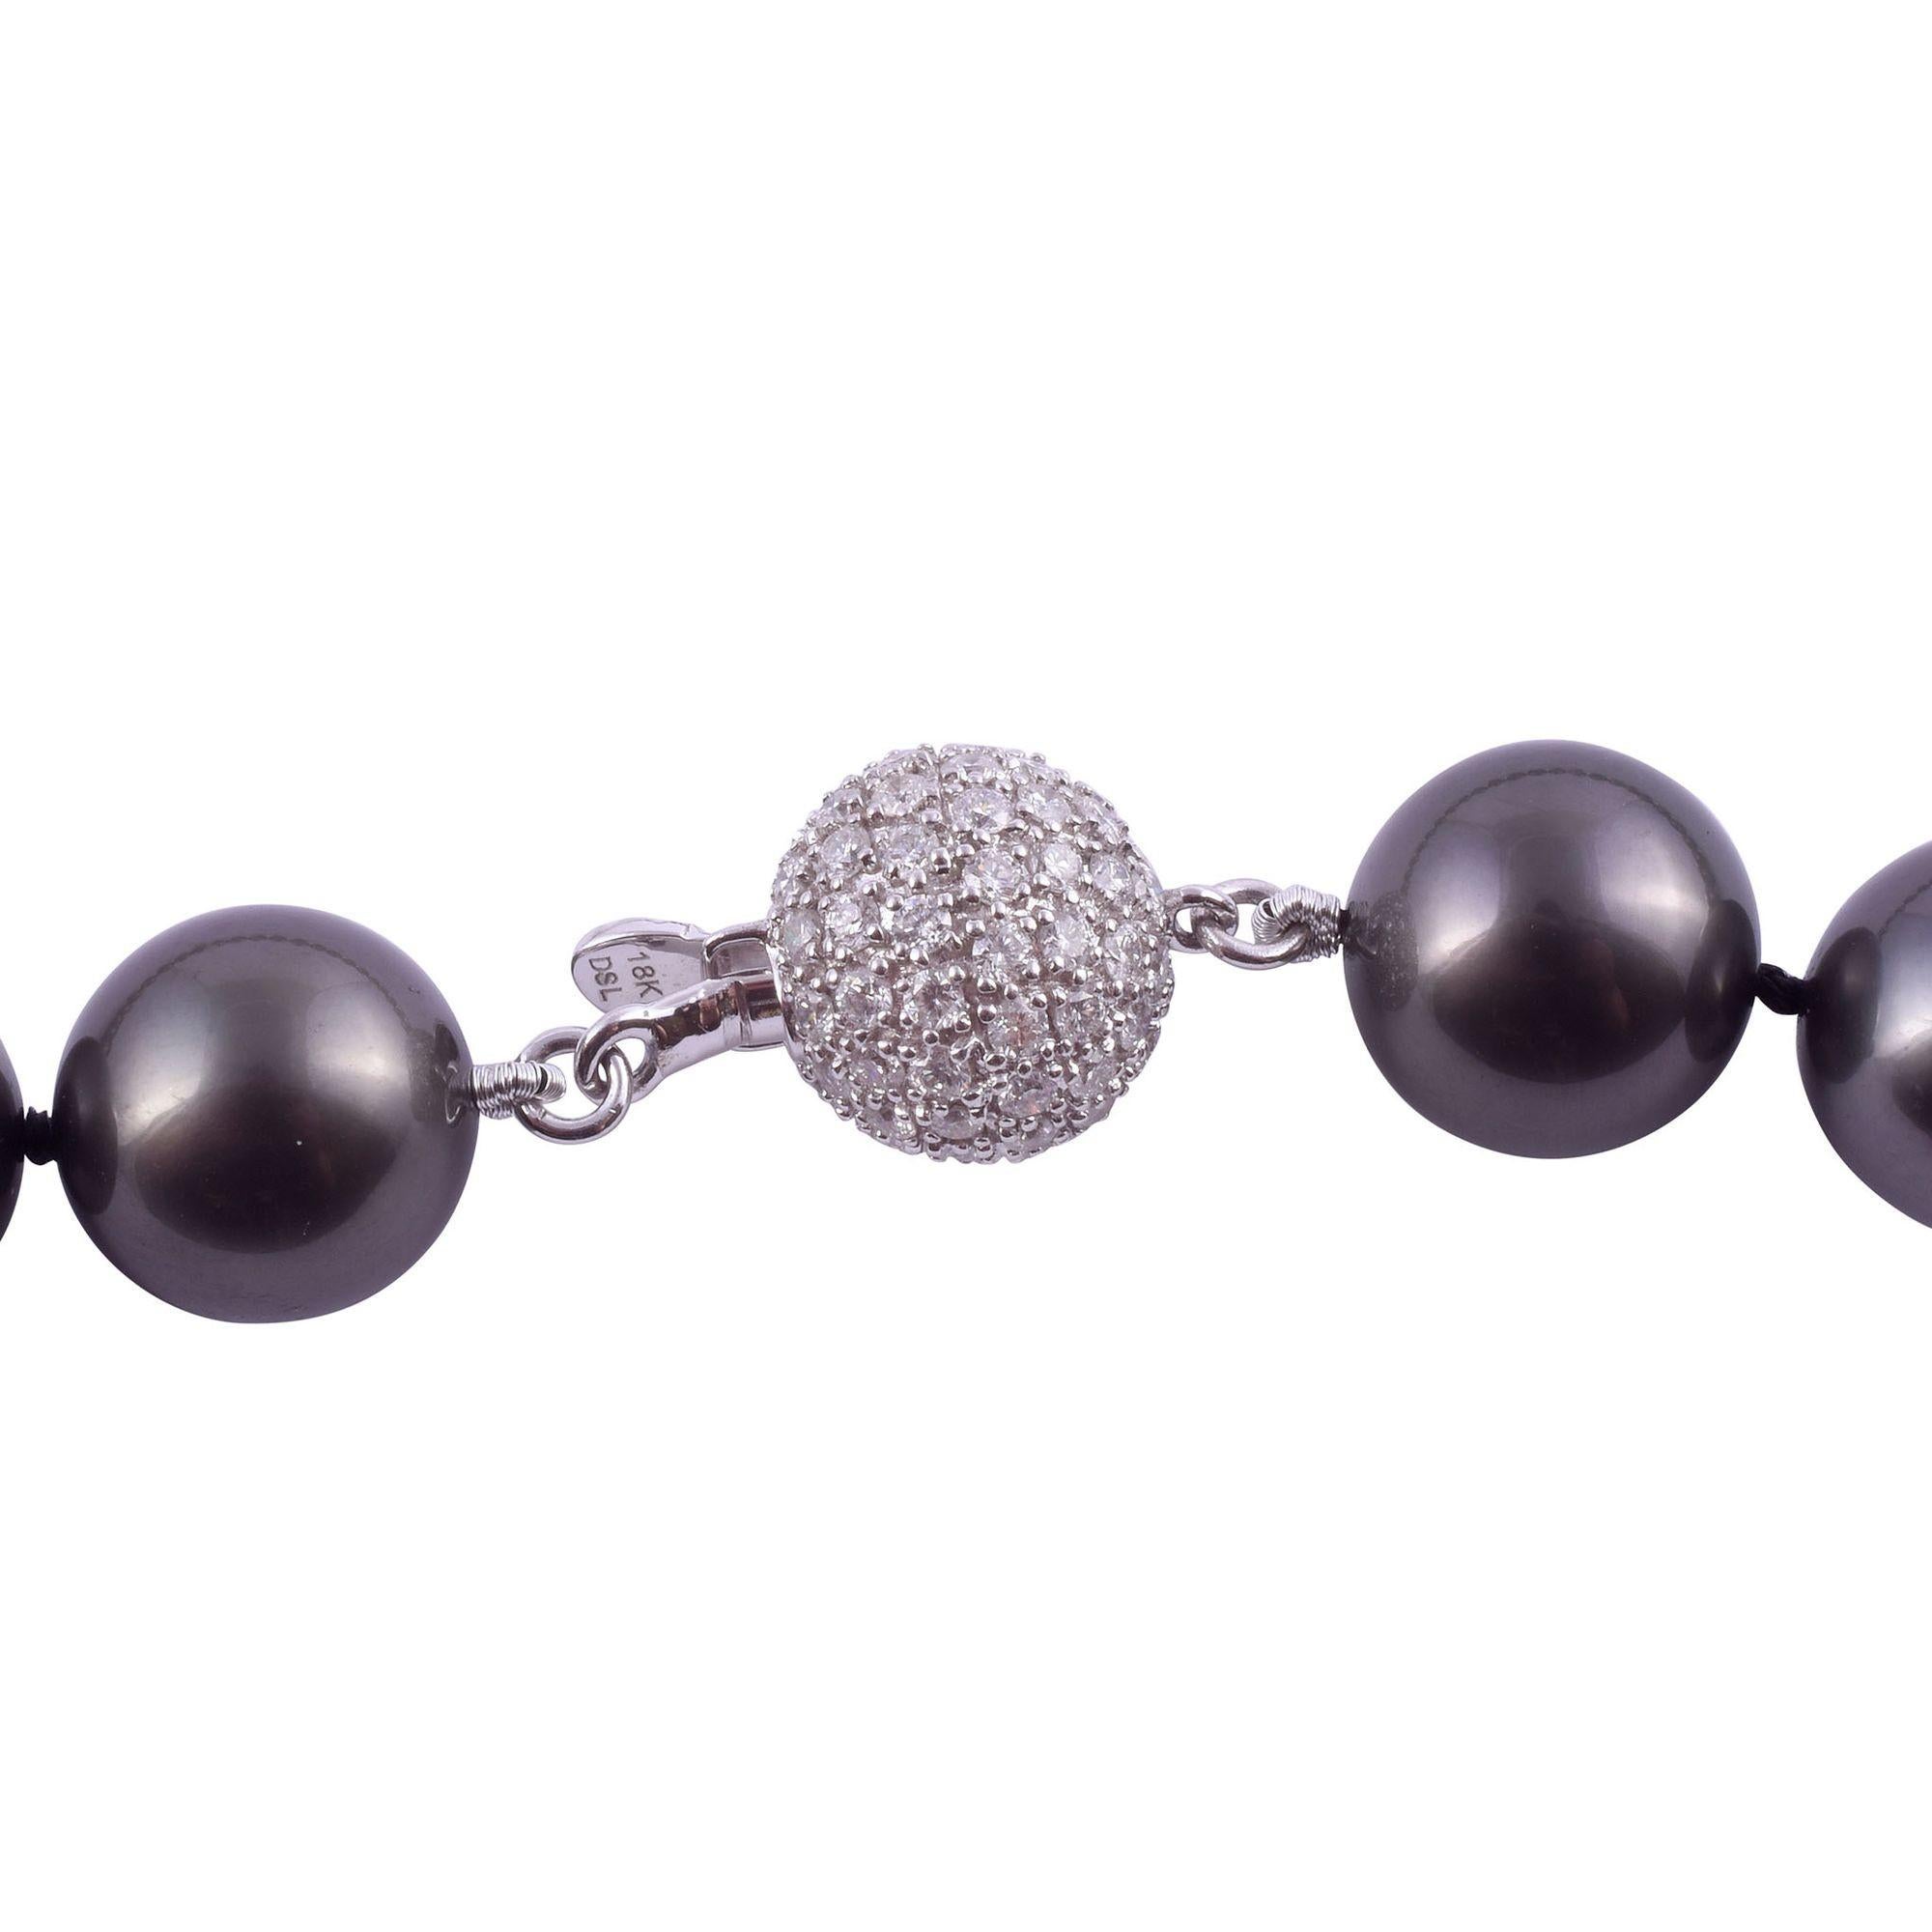 Estate very fine graduated Tahitian pearl necklace with diamond clasp. This beautiful necklace features 37 graduated cultured Tahitian pearls that measure 11.1-14.4mm. These pearls are dark grey black in color, have very good to excellent luster,